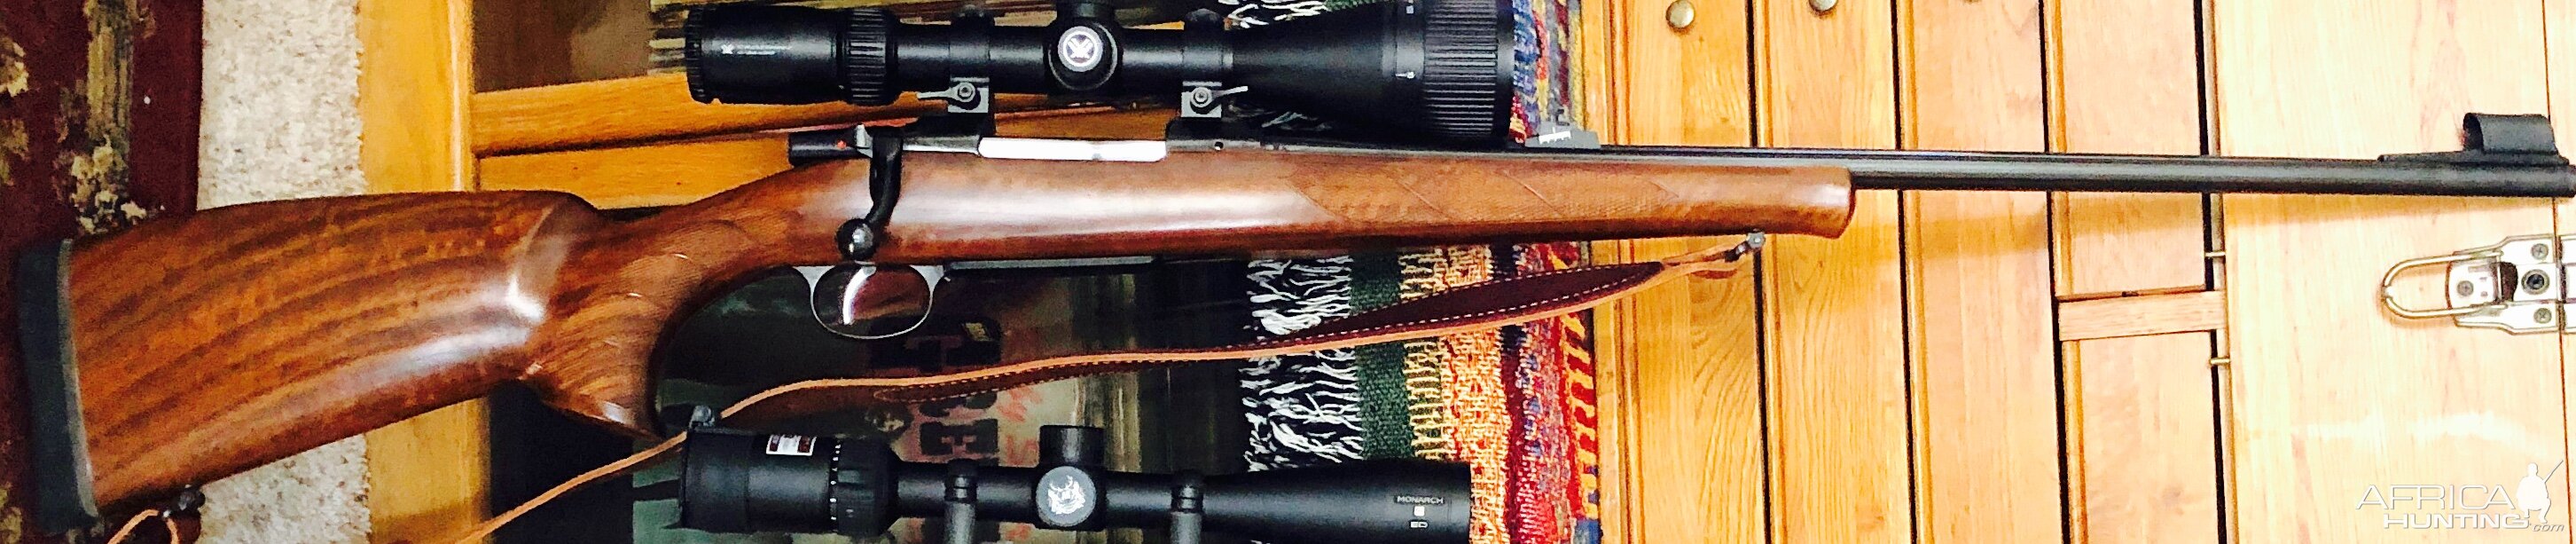 Euro stocked CZ550 7x57 Rifle with the 24'' barrel